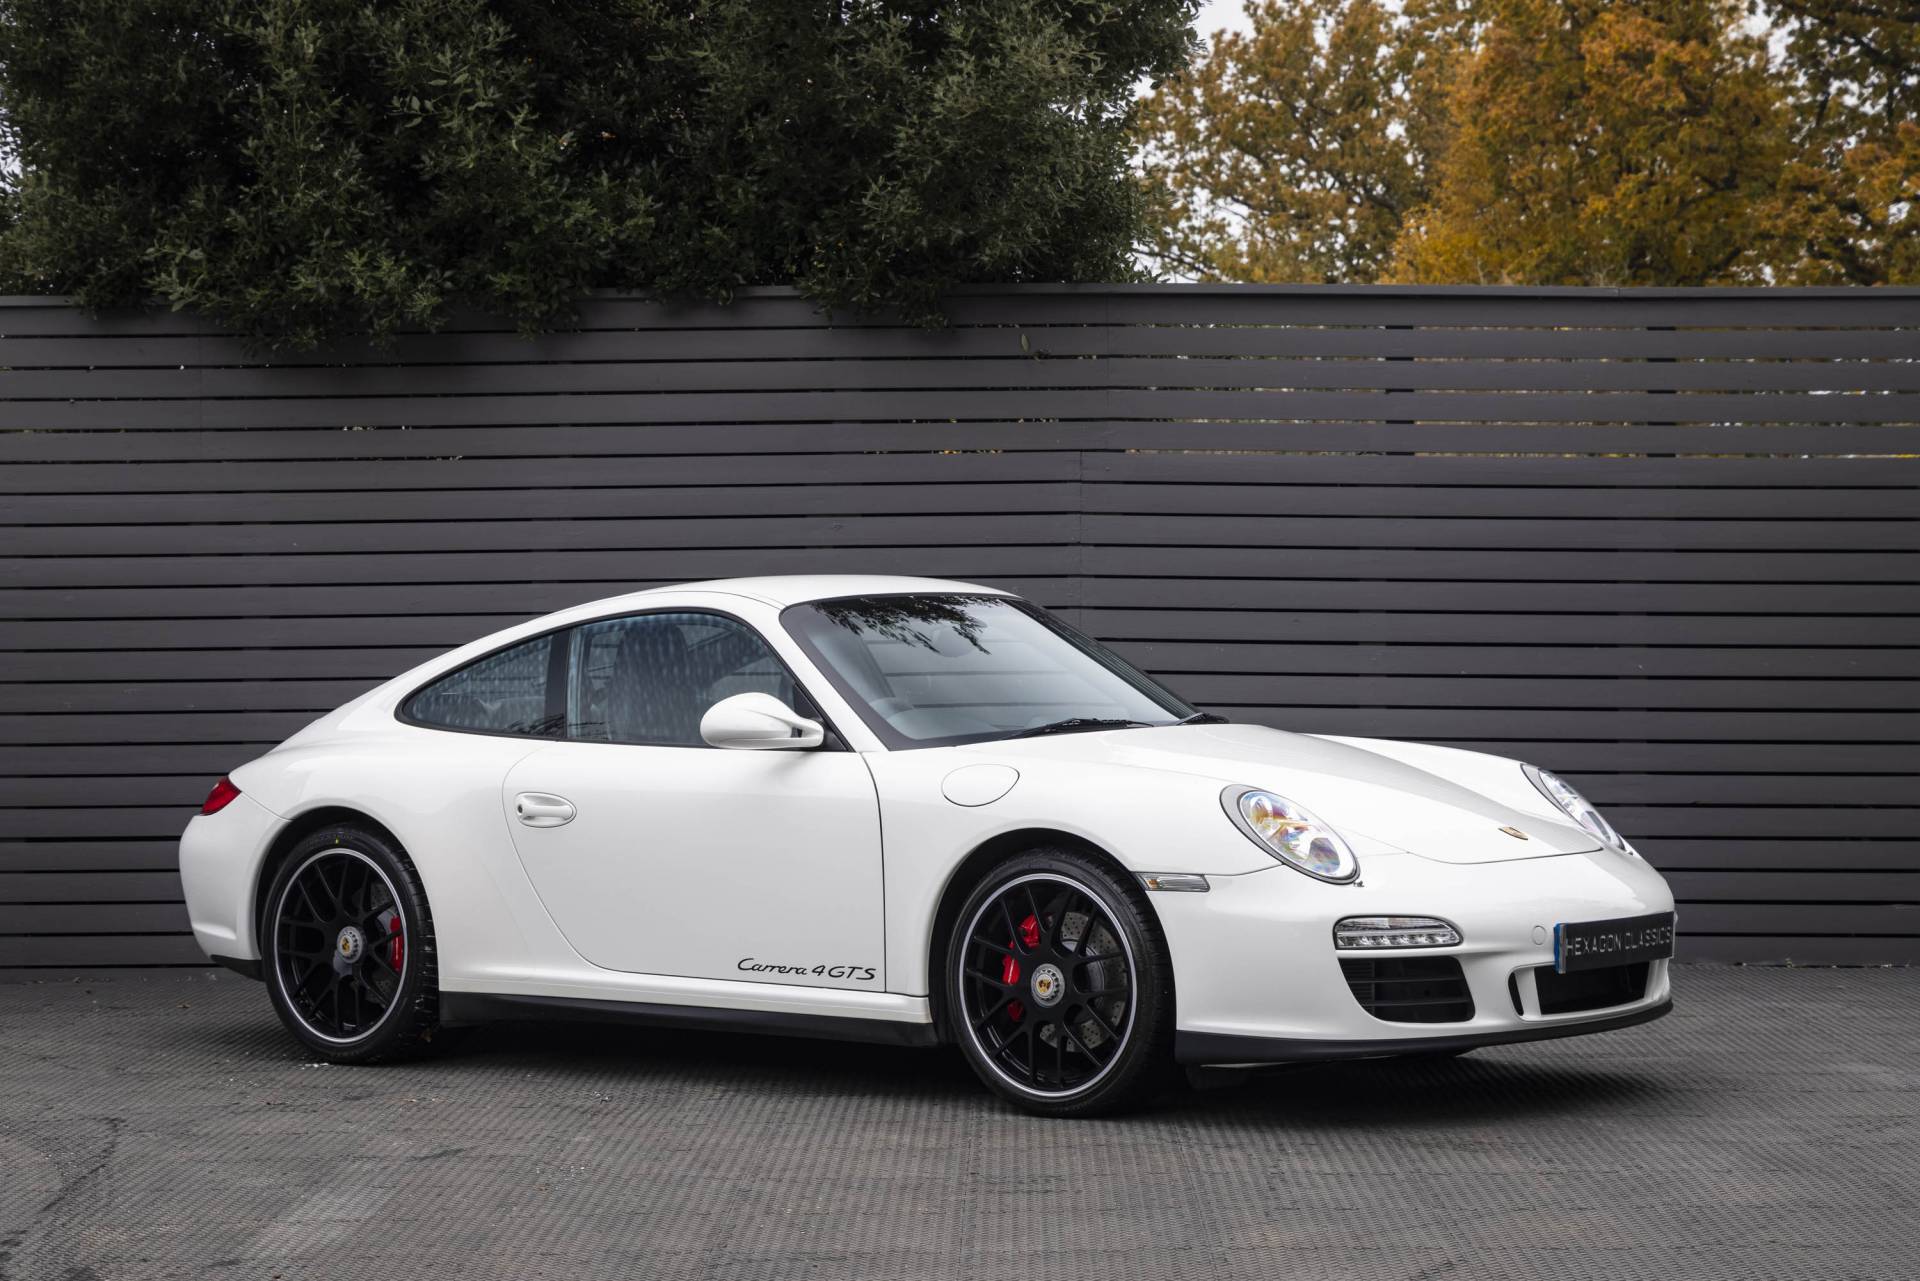 For Sale: Porsche 911 Carrera 4 GTS (2012) offered for $157,057